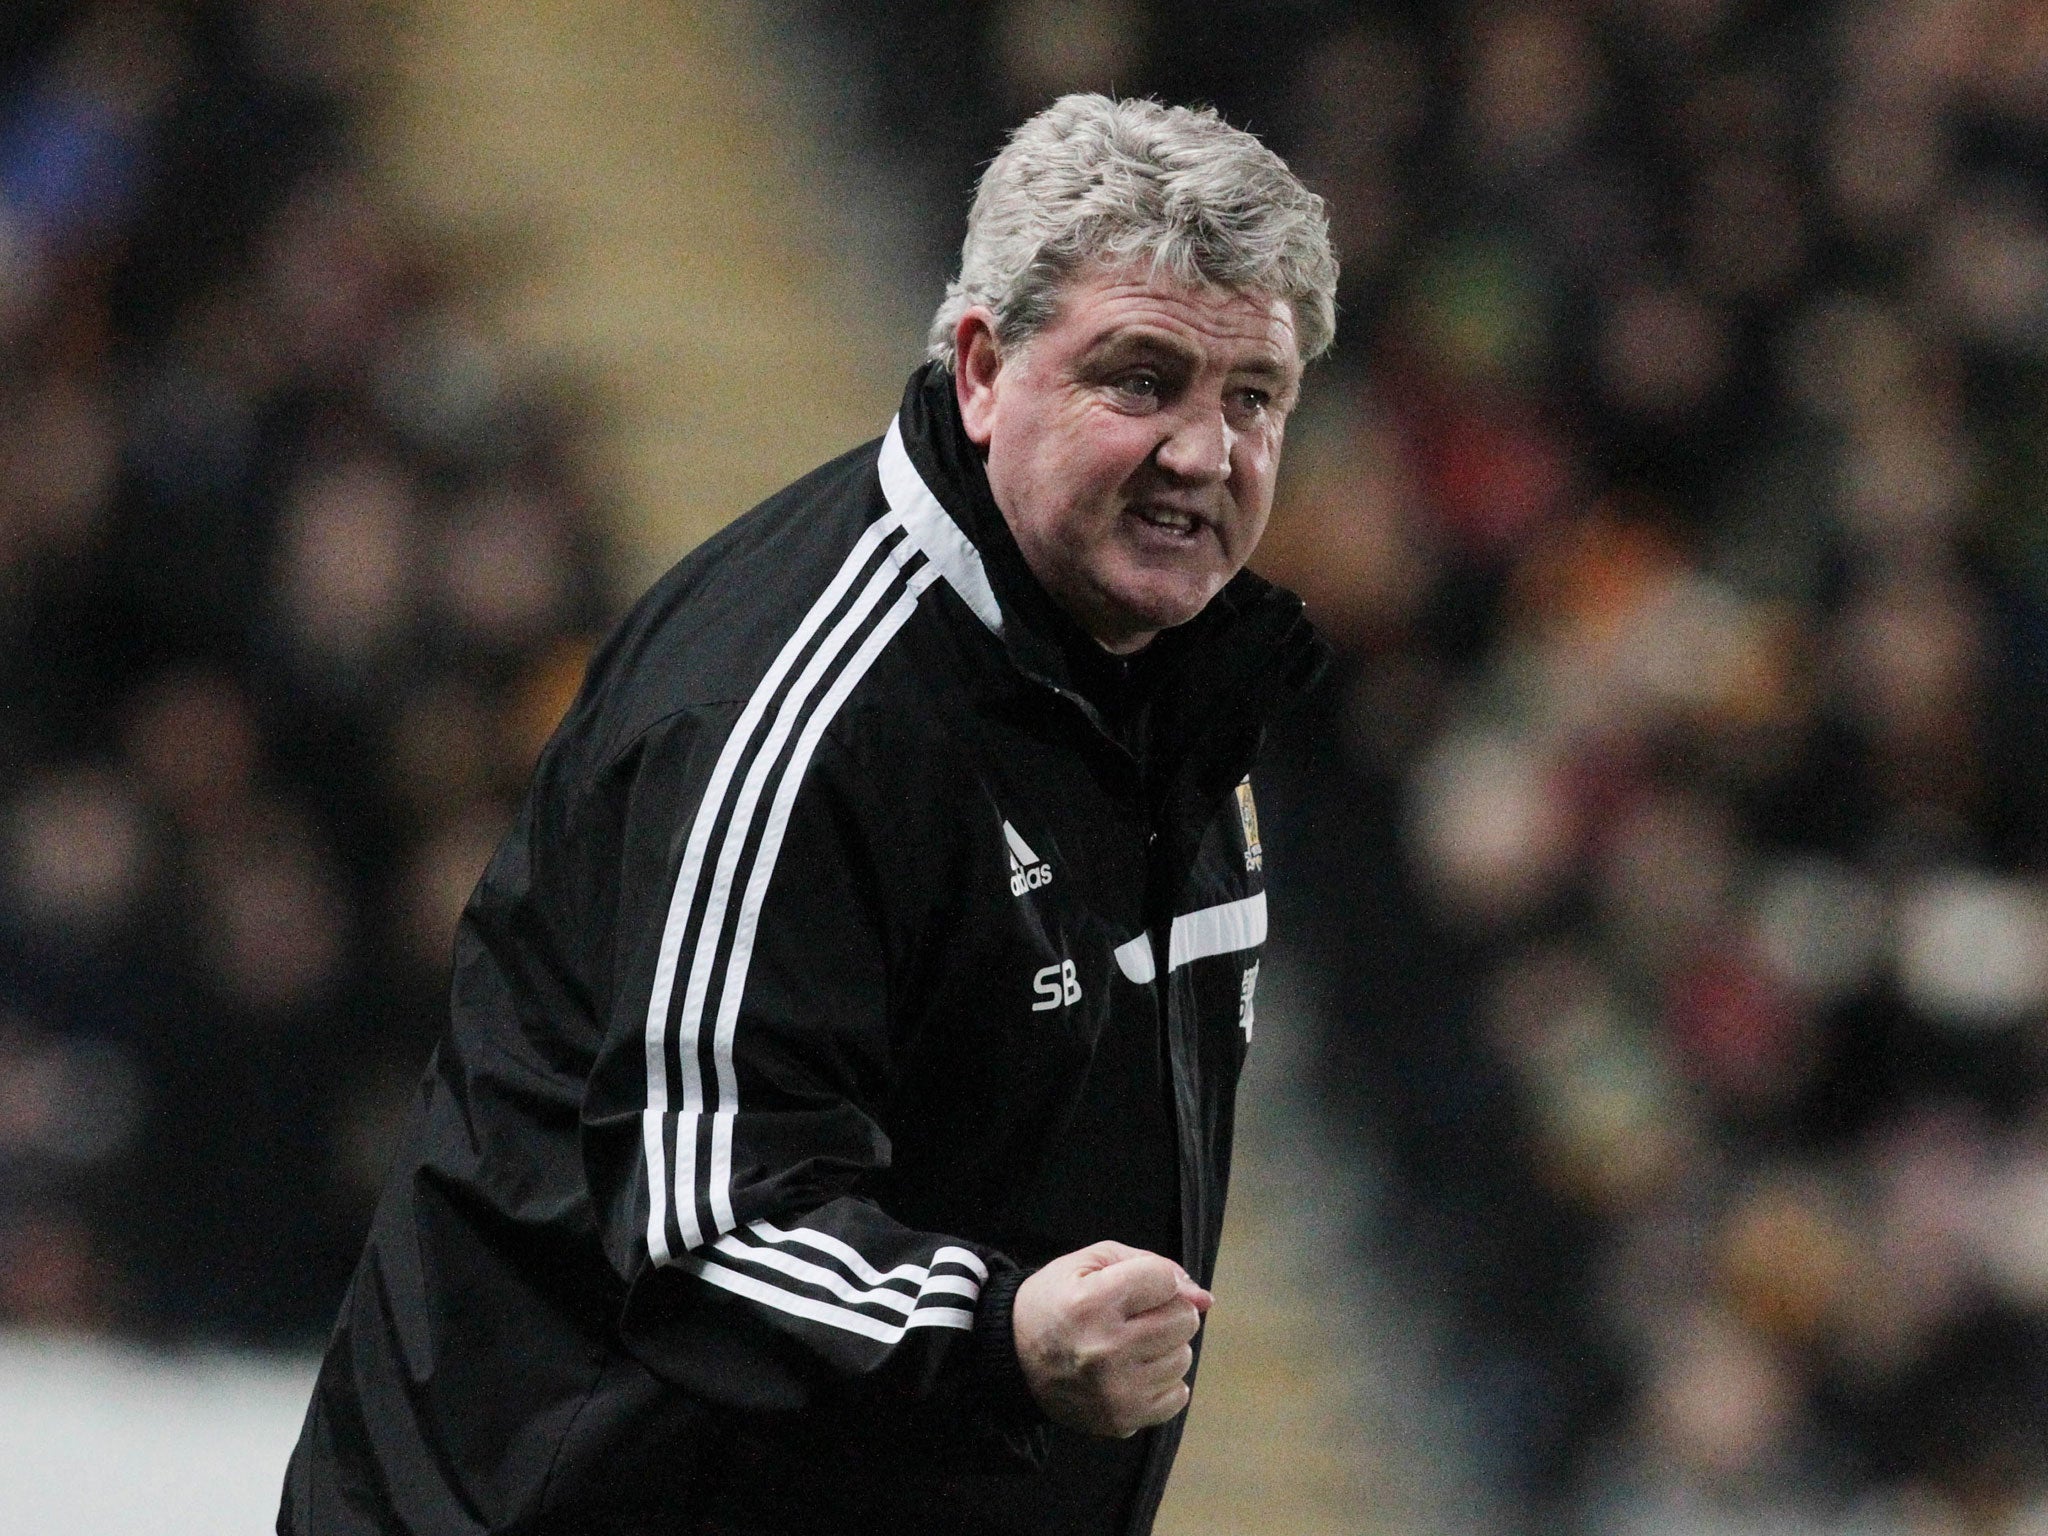 Steve Bruce gestures from the touchline